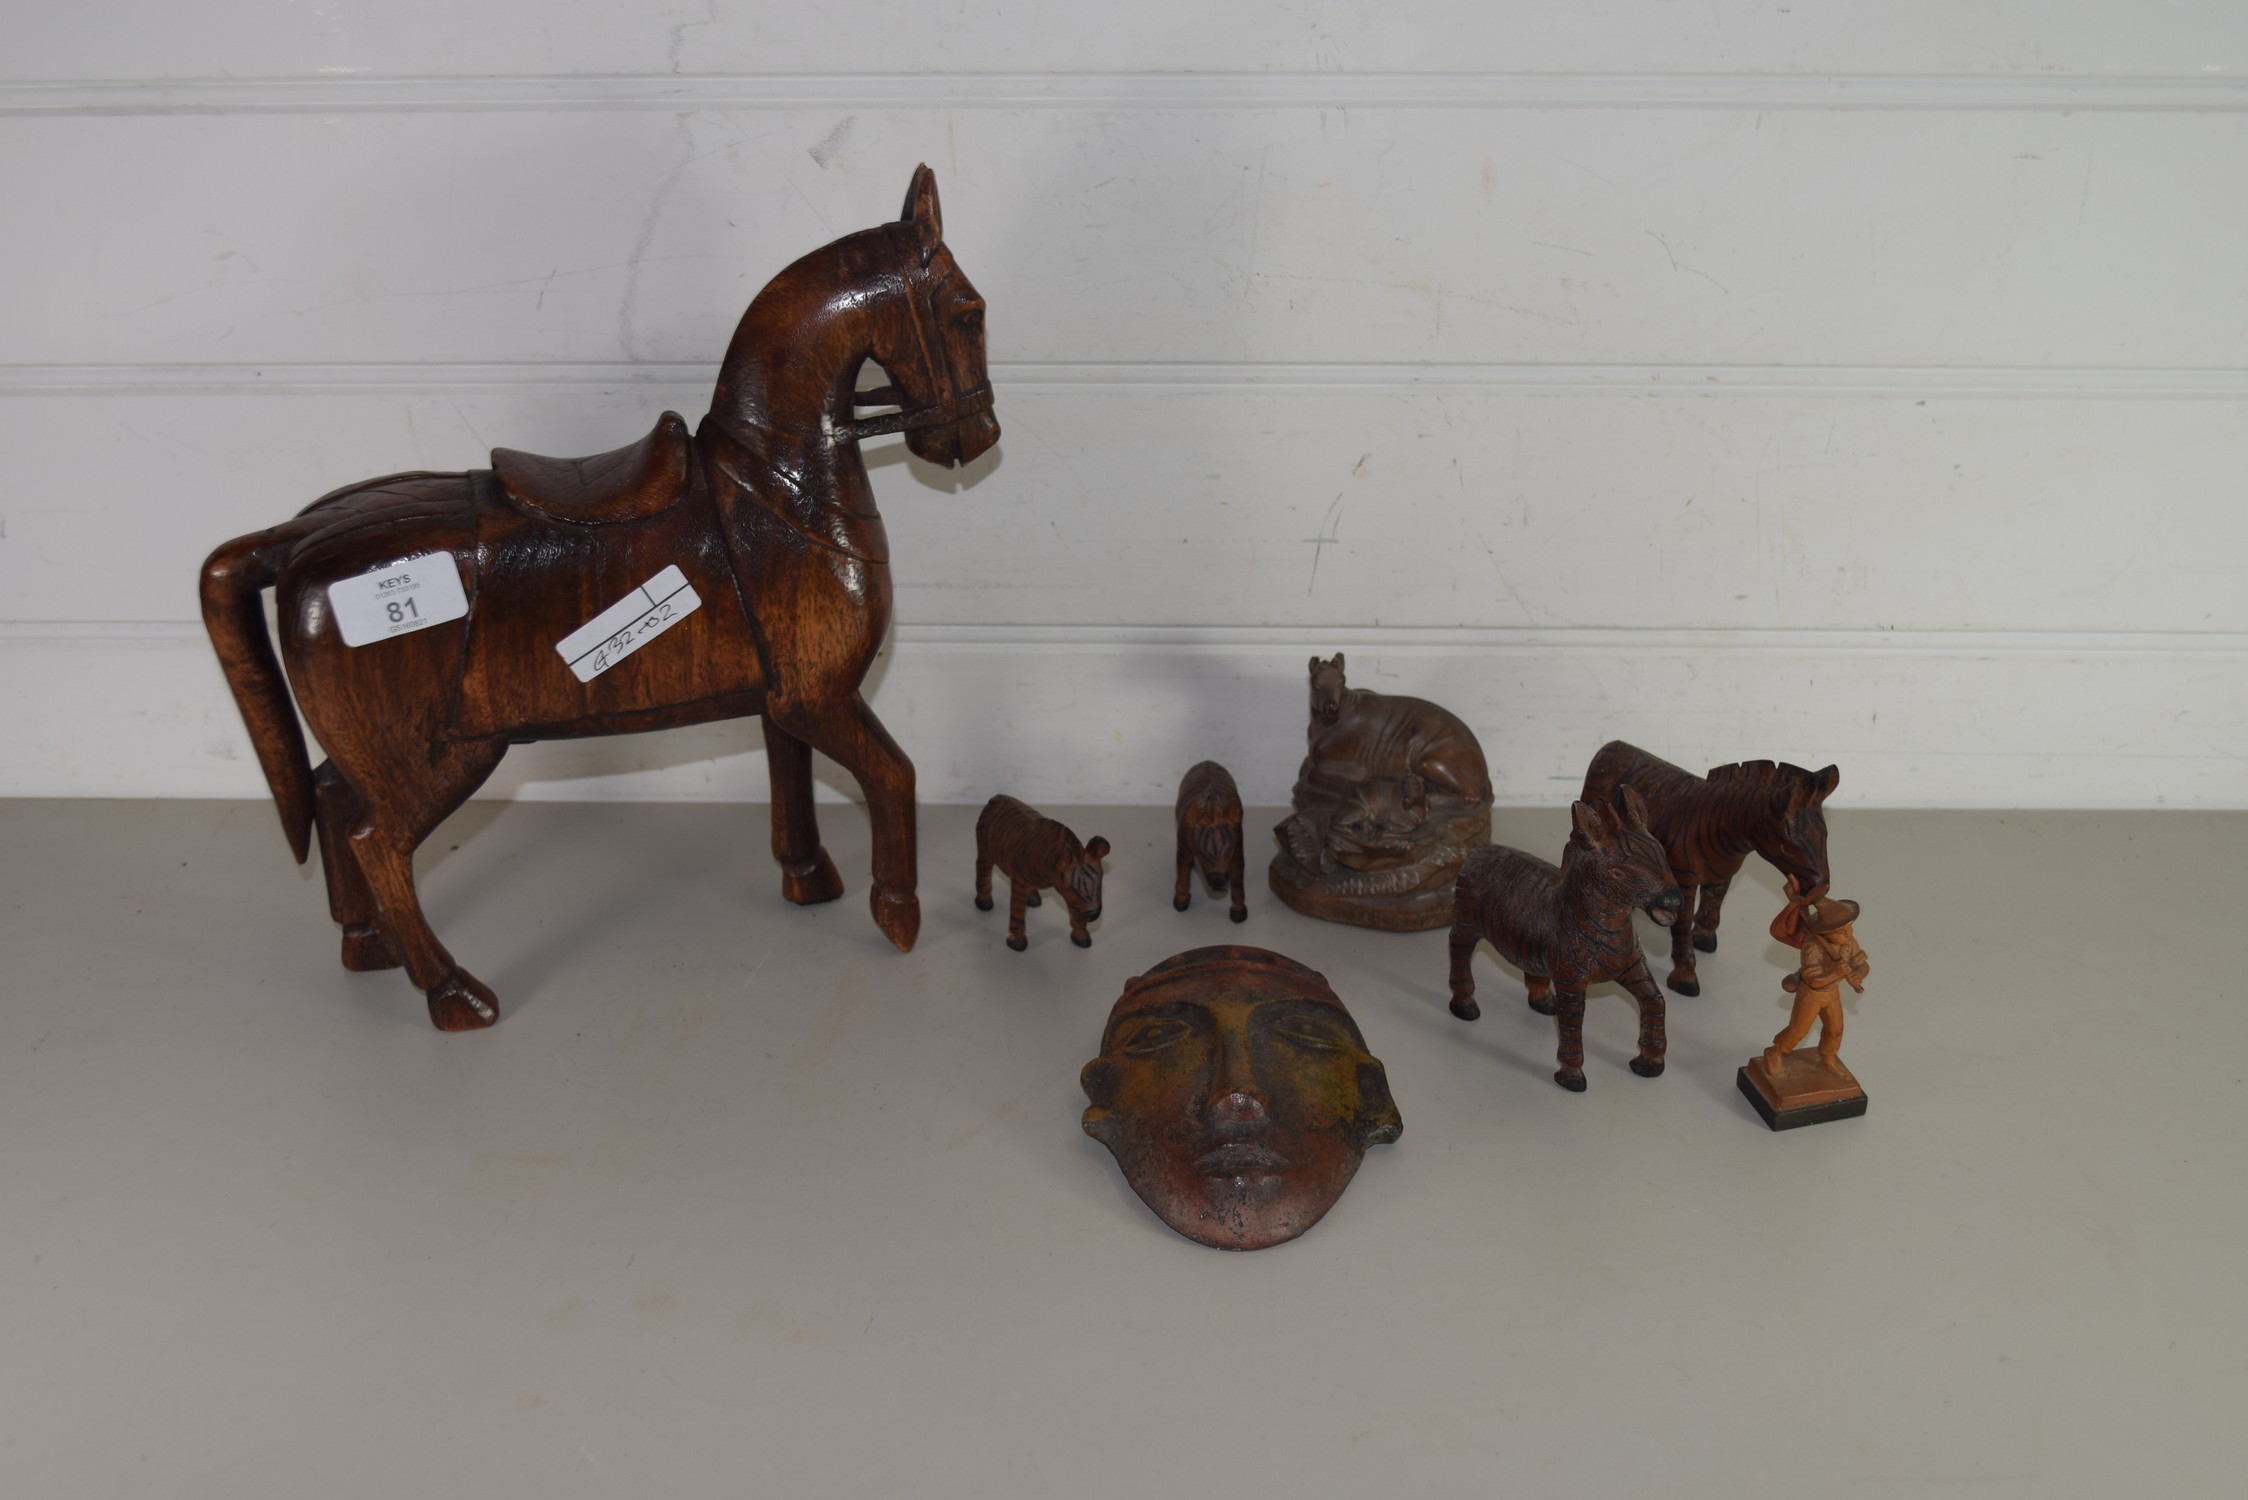 LARGE WOODEN MODEL OF A HORSE AND OTHER WOODEN MODELS